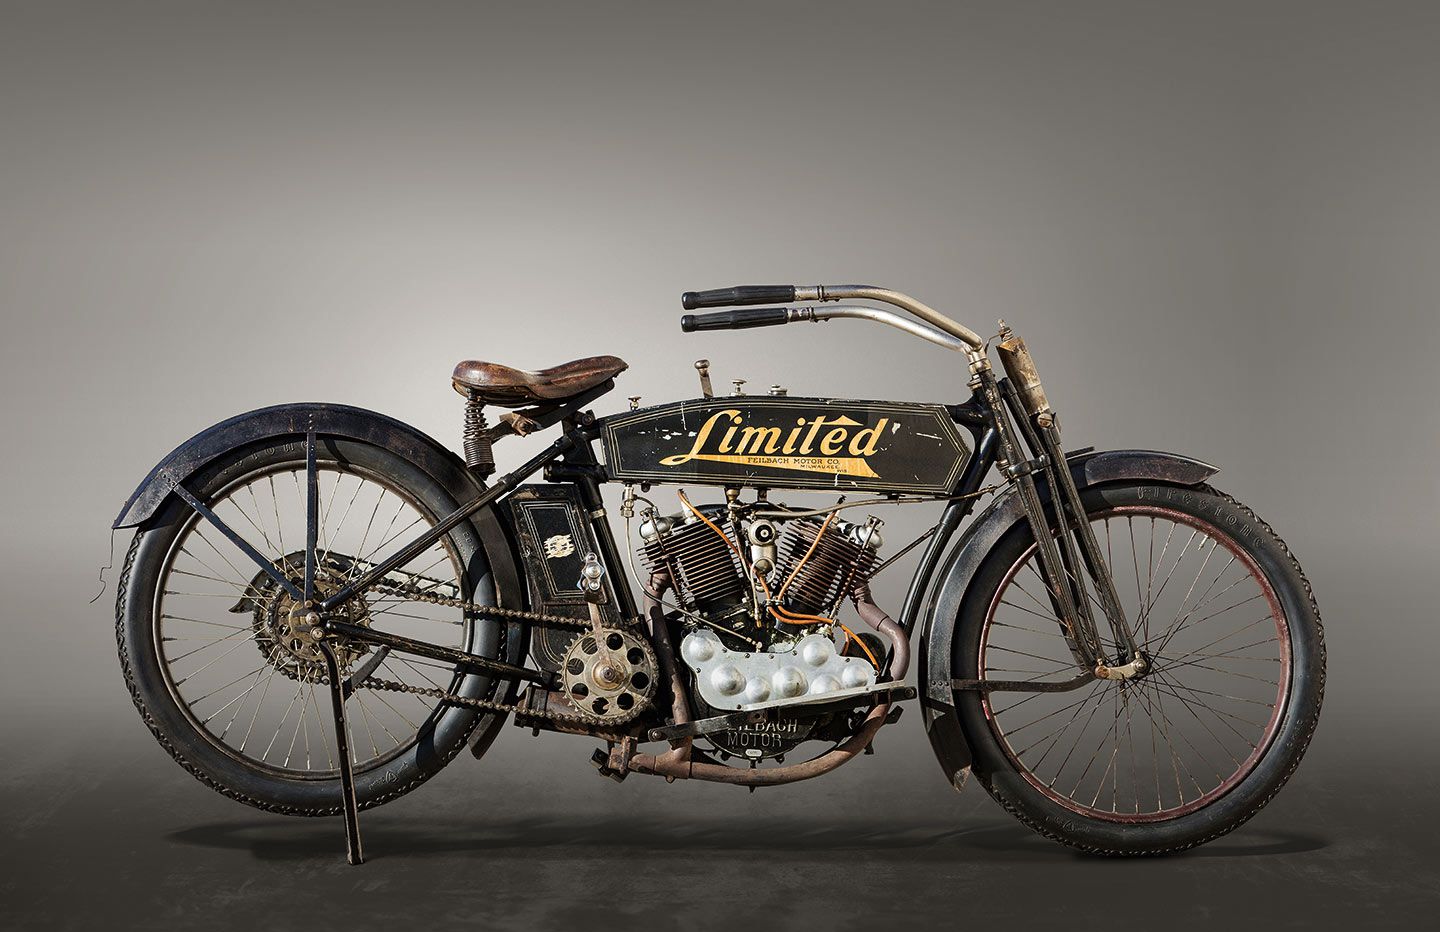 A 1913 or 1914 Feilbach Limited V-twin, manufactured in Milwaukee, Wisconsin. This example was produced by owner Arthur Feilbach himself from spare parts.